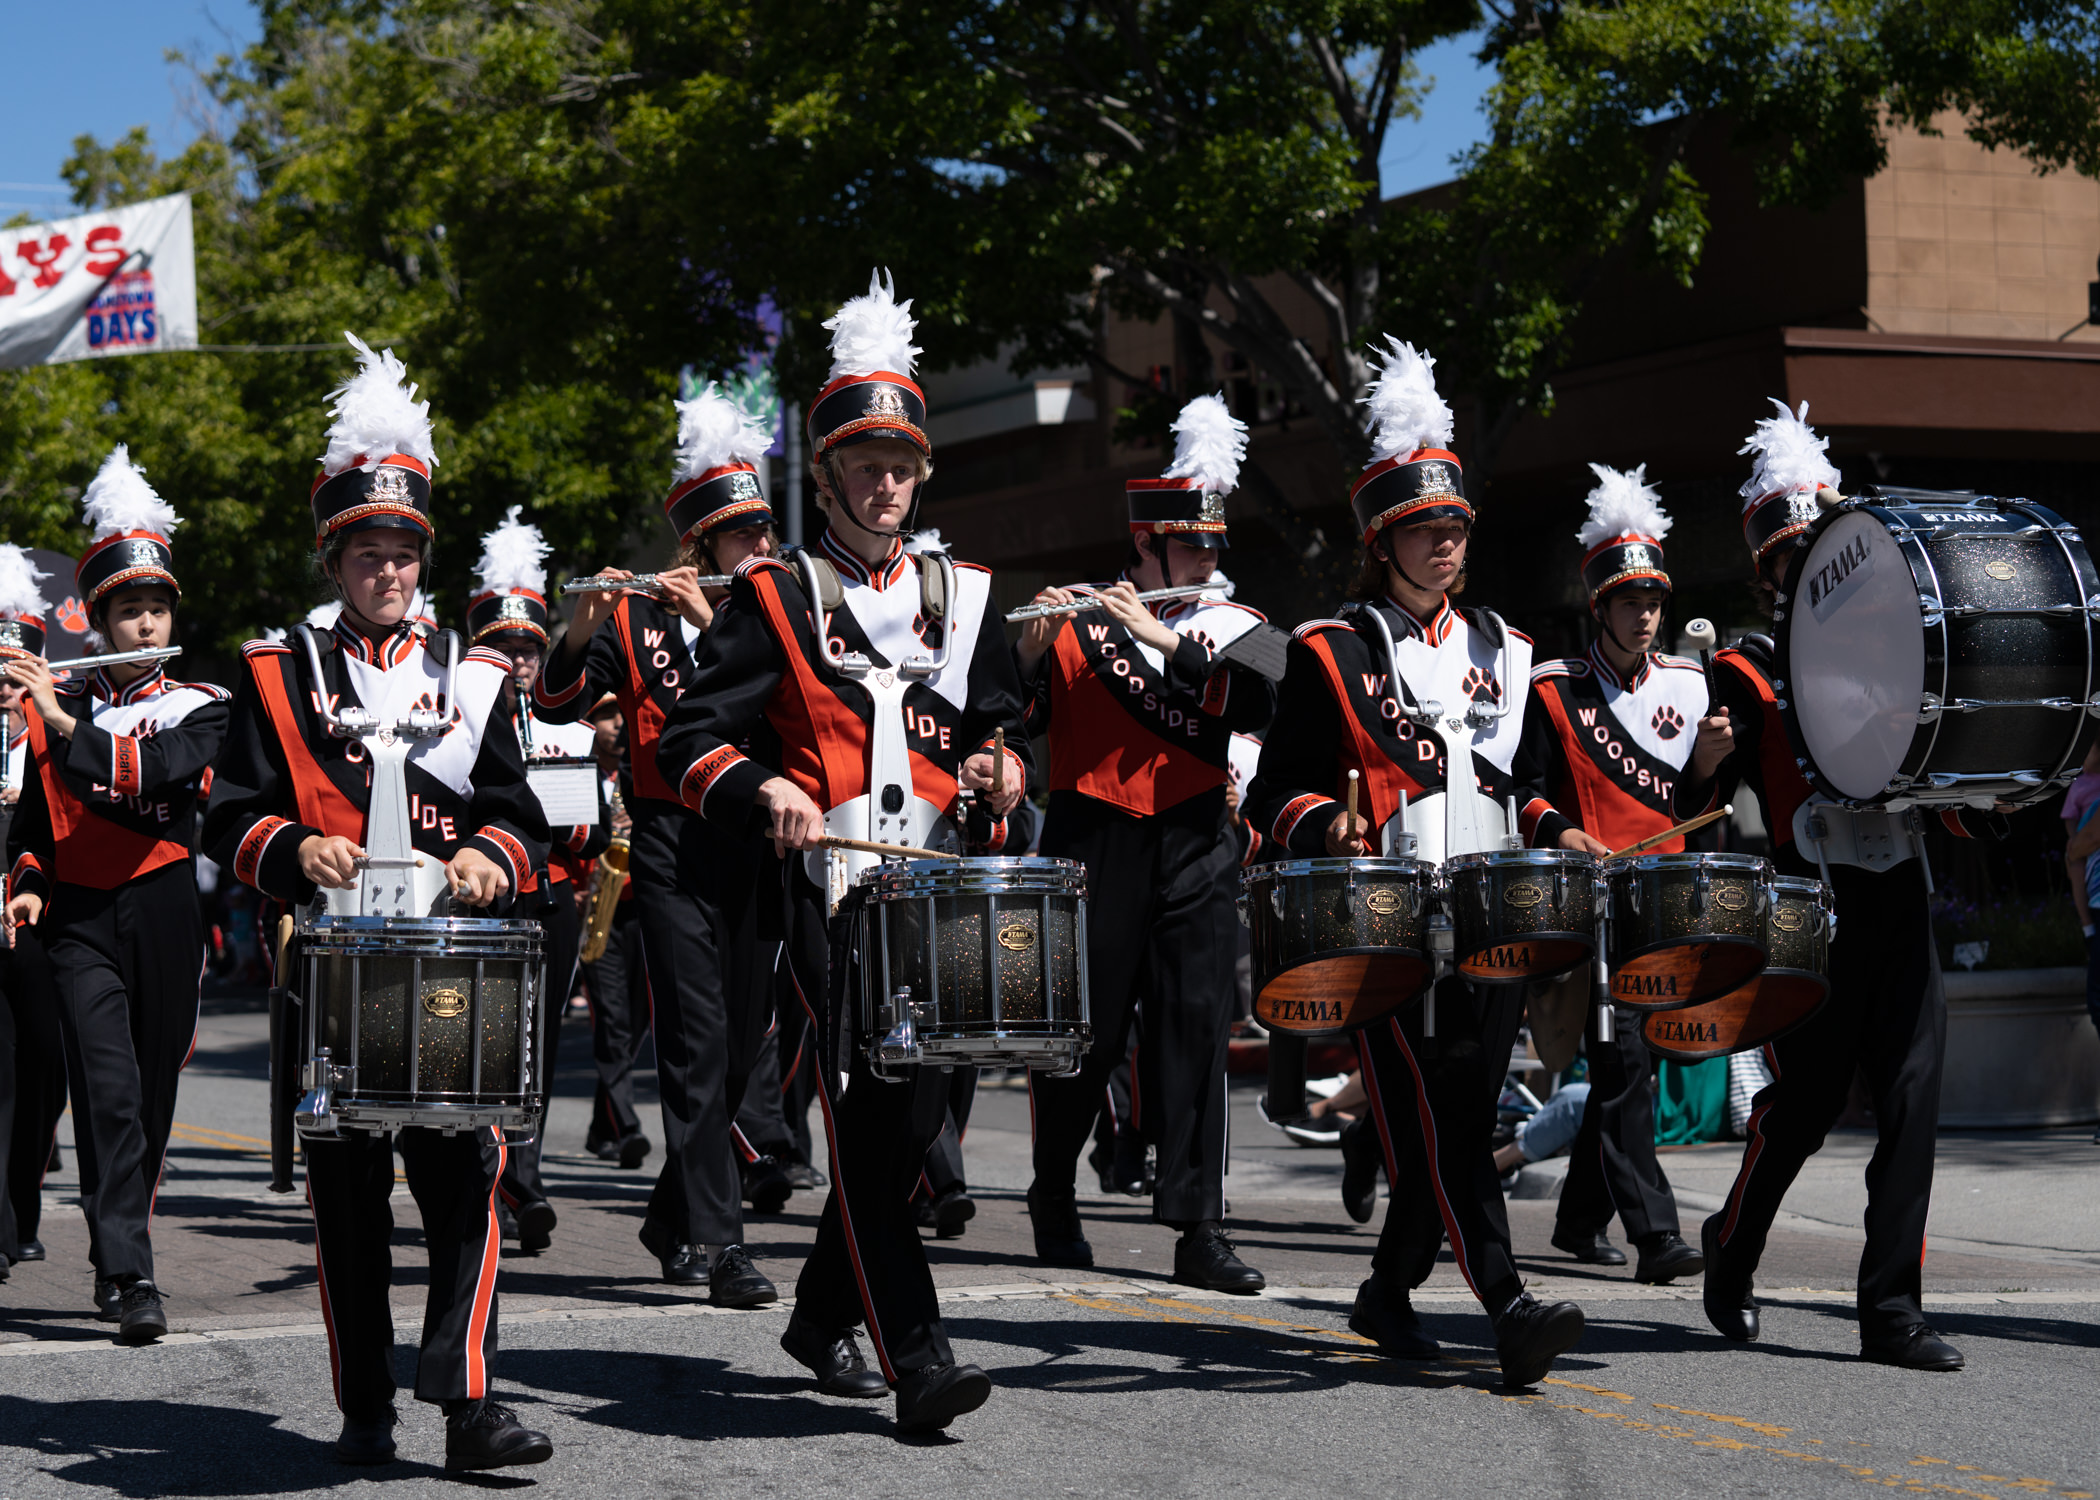 Community Foundation of San Carlos seeks parade friends for Hometown Days